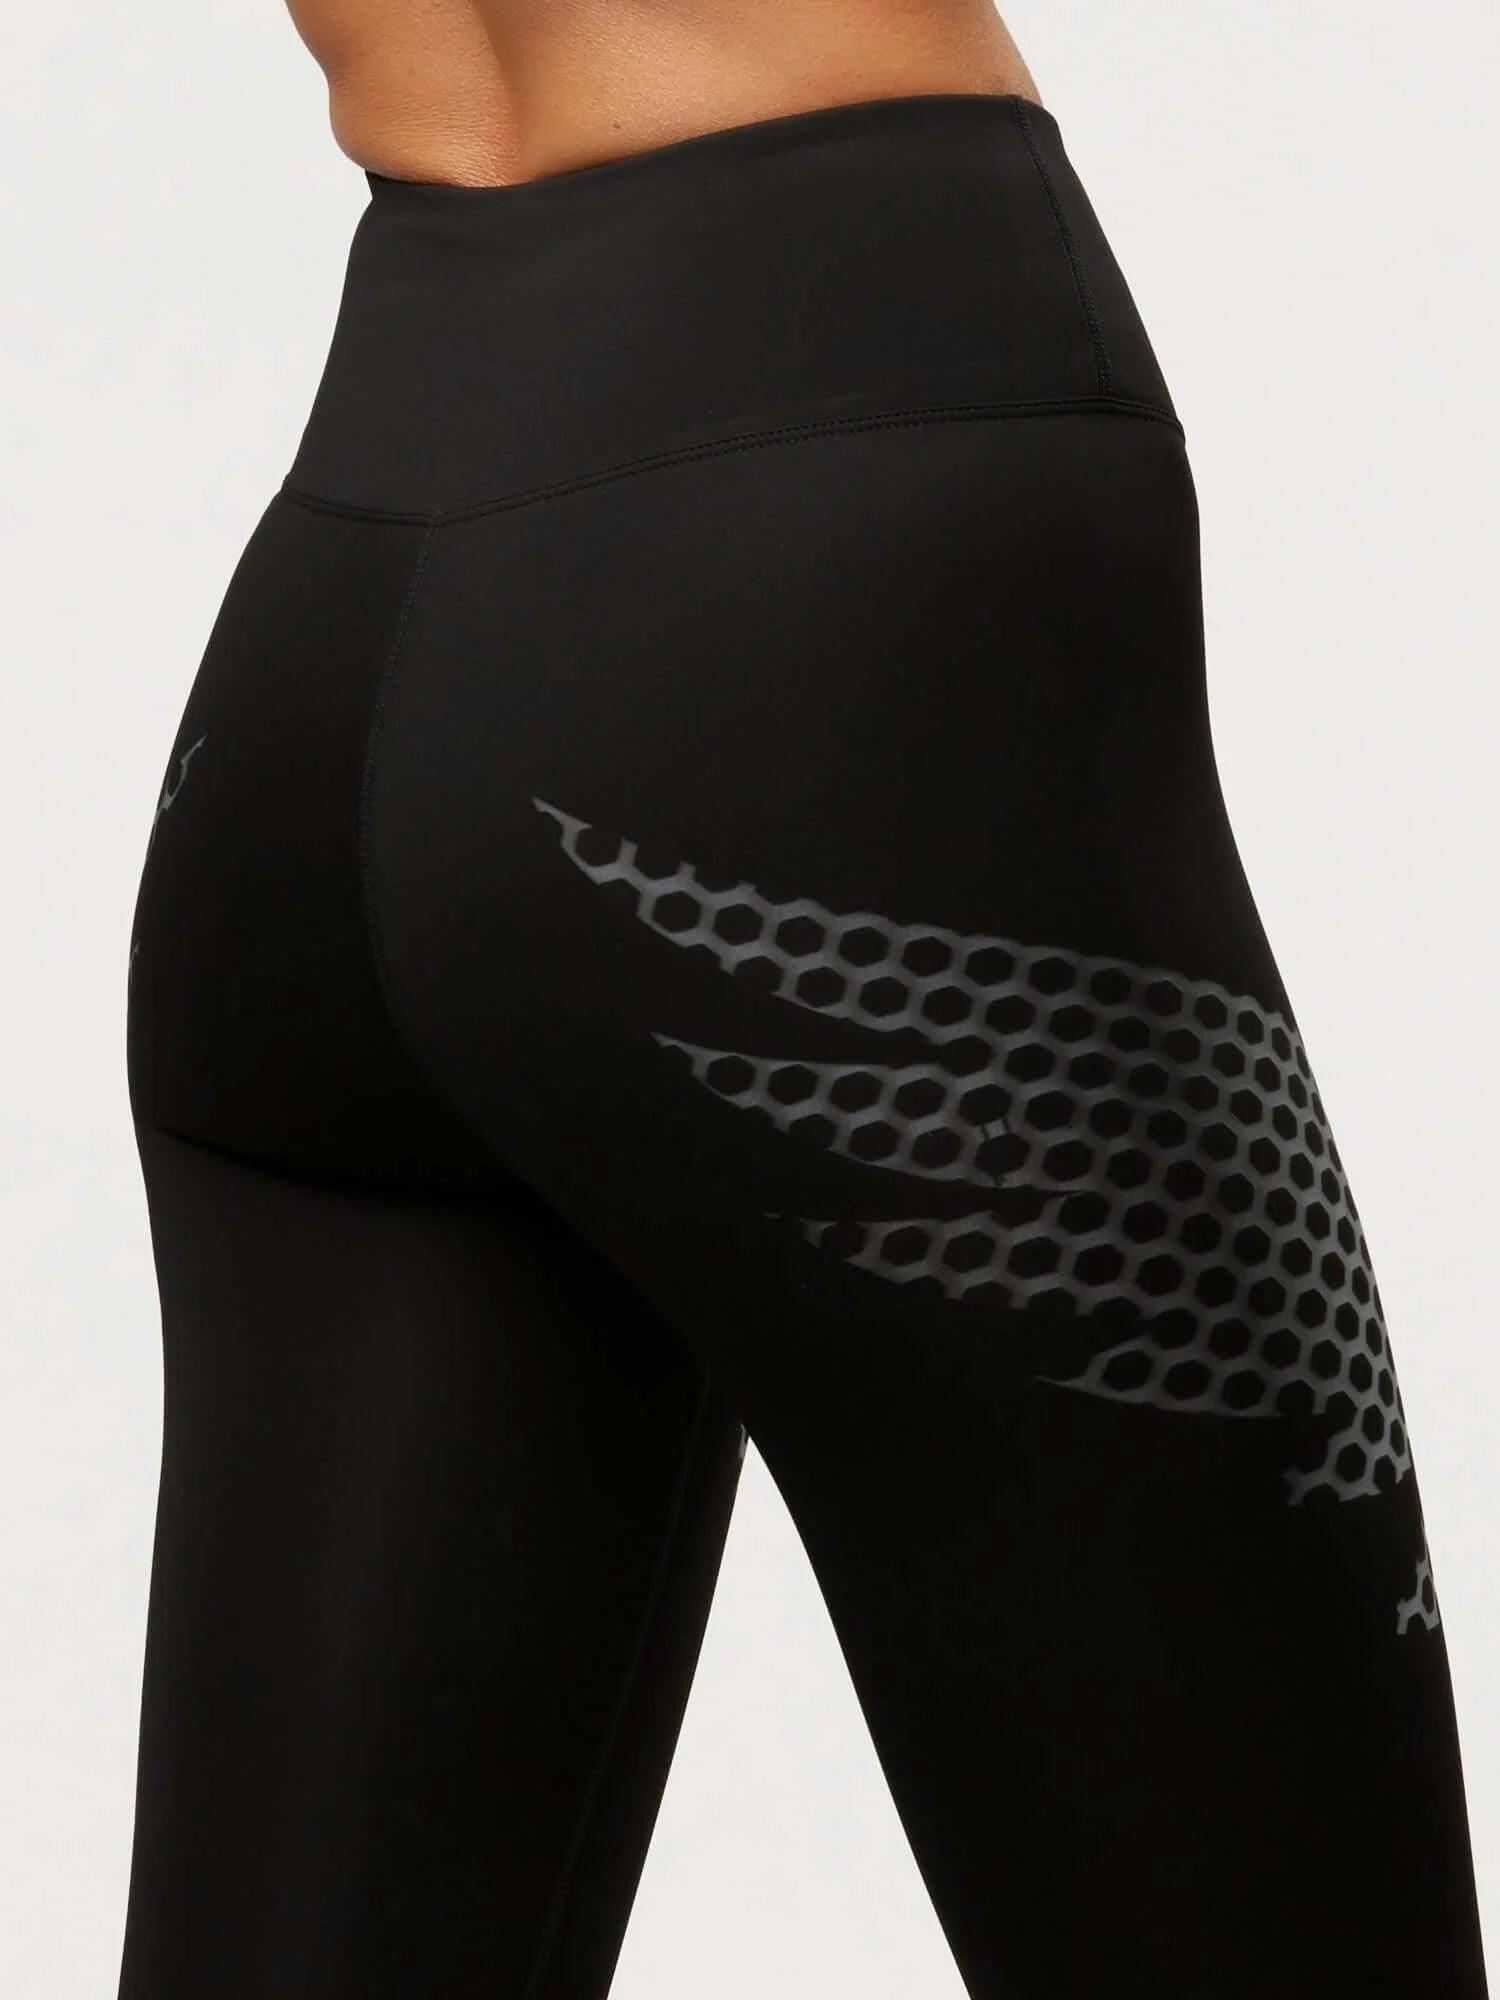 Limitless Compression Tight, Charcoal